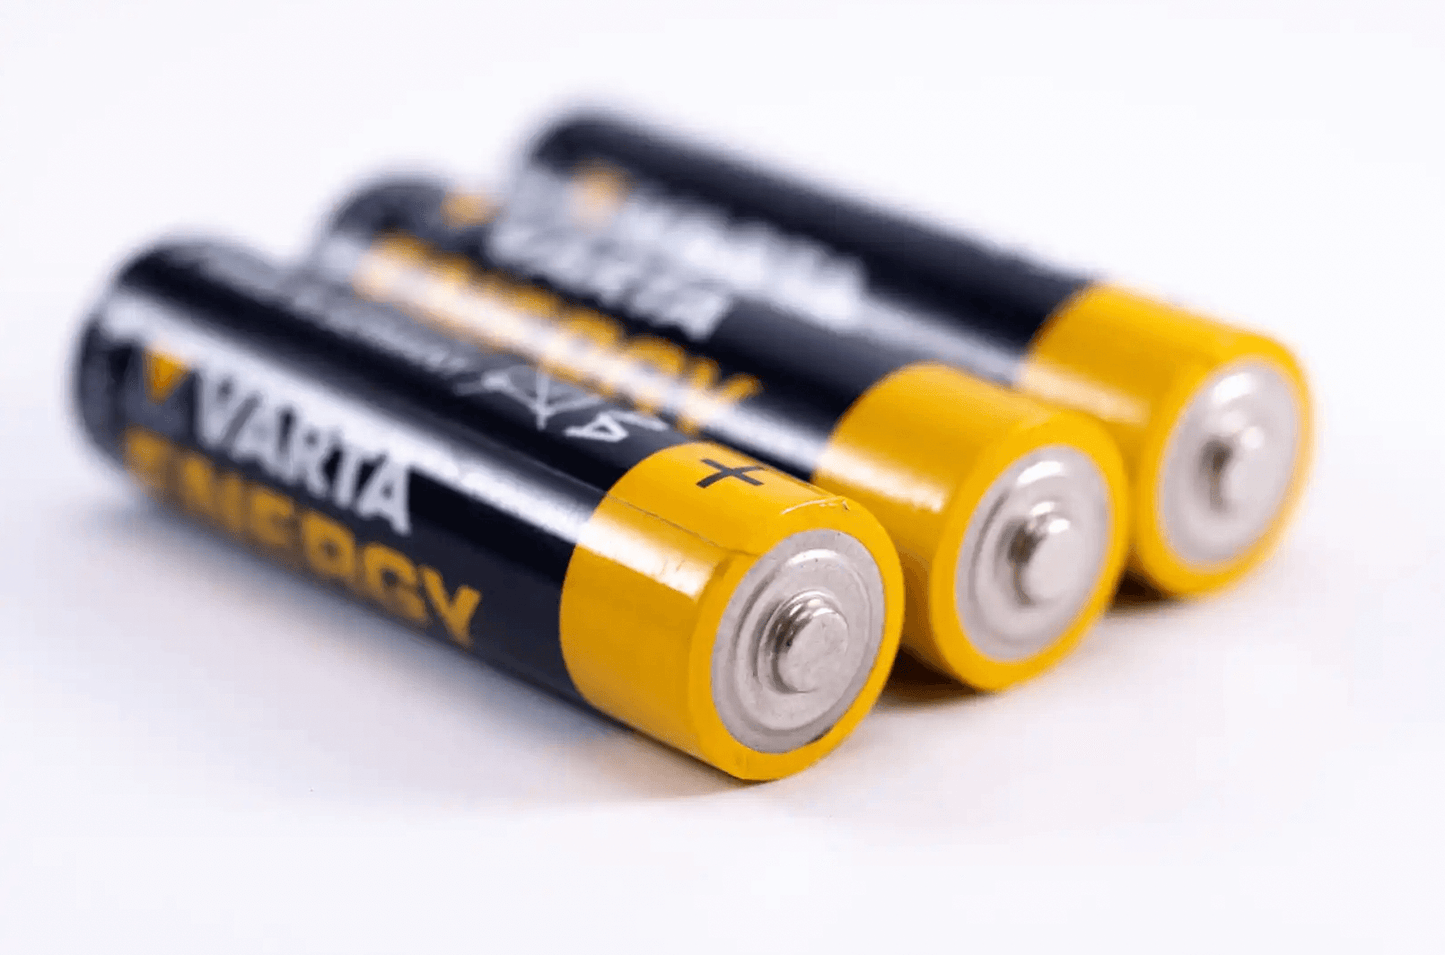 Example of UN 3480 lithium batteries by themselves